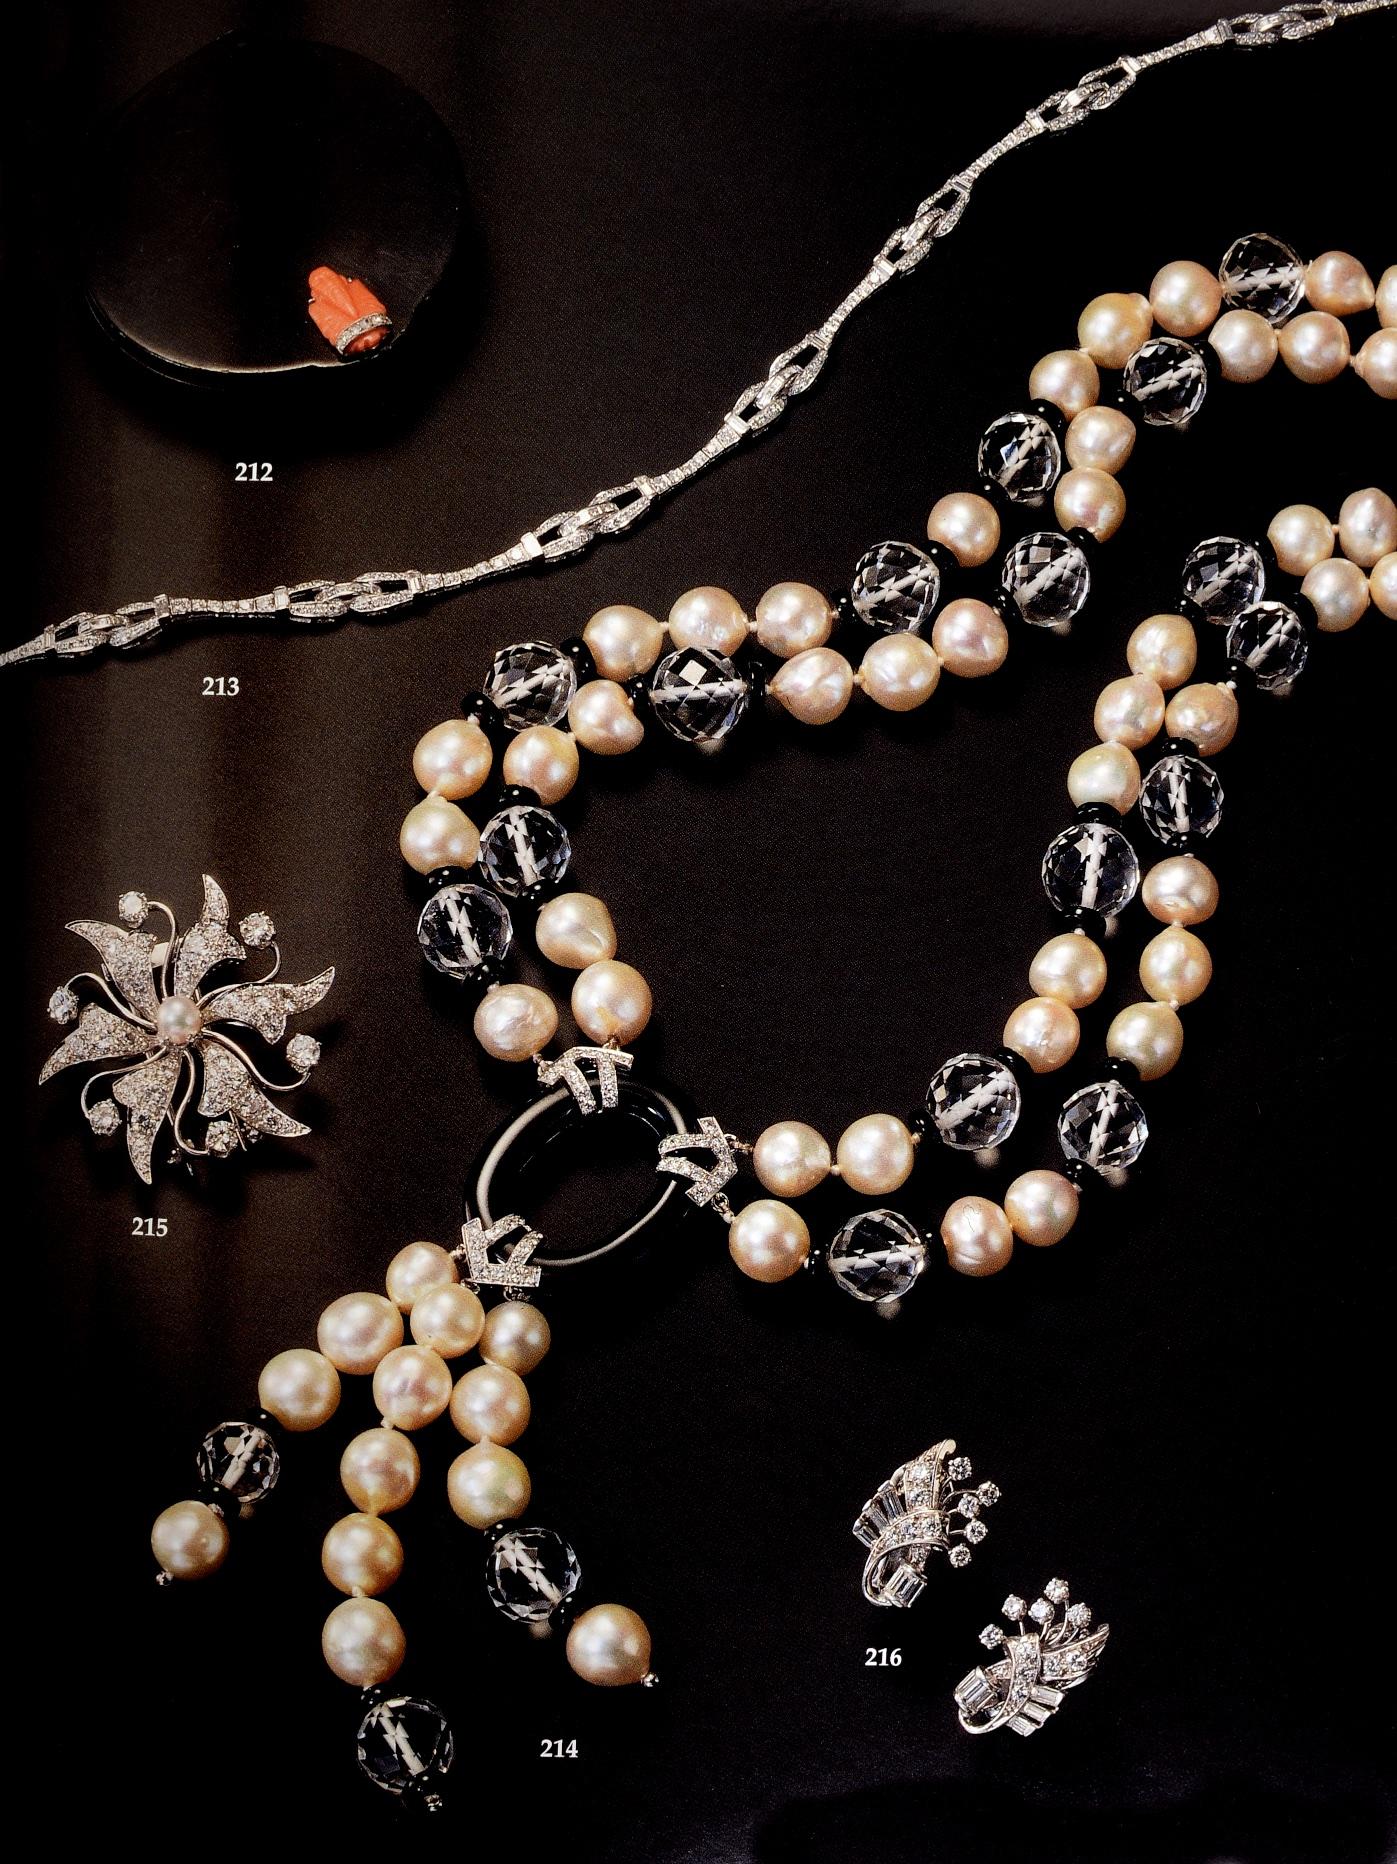 Late 20th Century Fine Jewels and Watches. Sotheby's Sale 7312, Los Angeles, May 4, 1999 For Sale